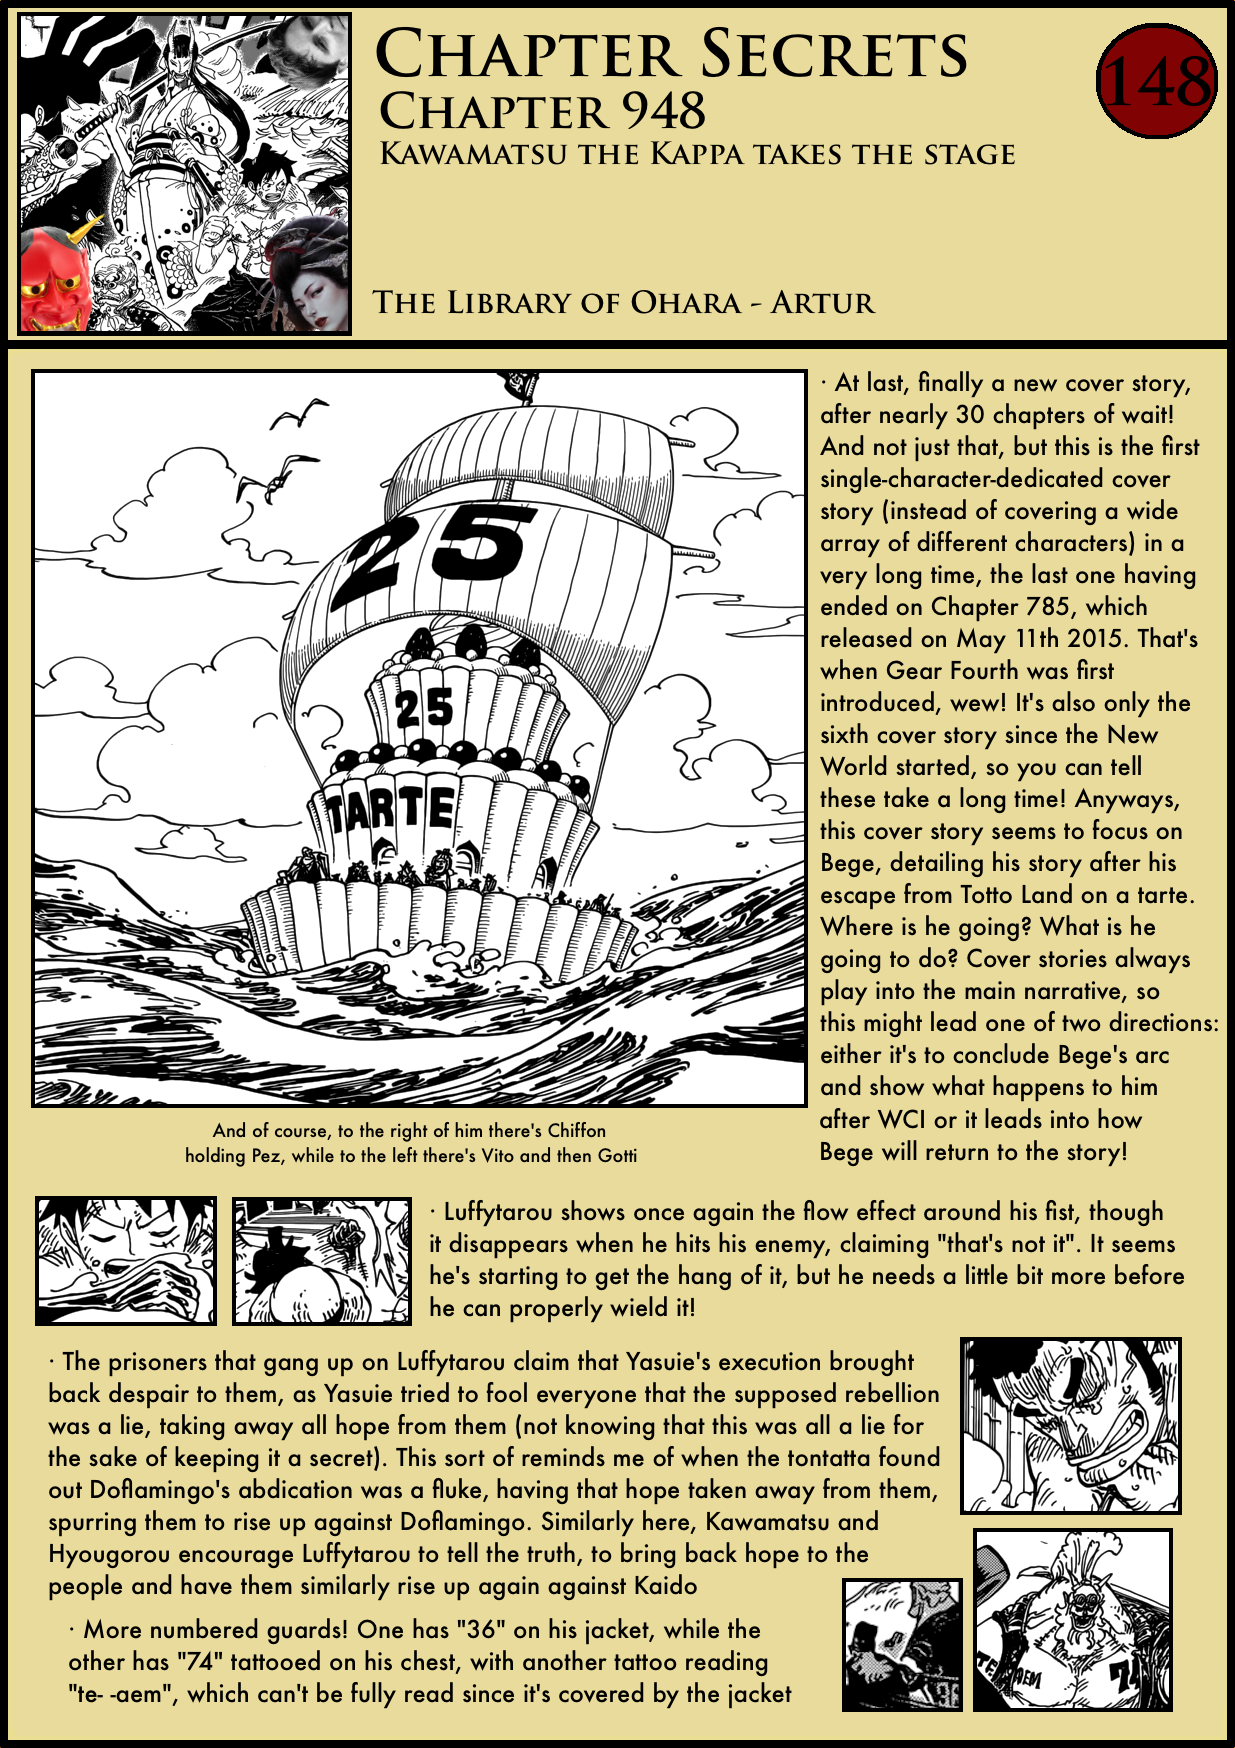 Chapter Secrets Chapter 948 In Depth Analysis The Library Of Ohara